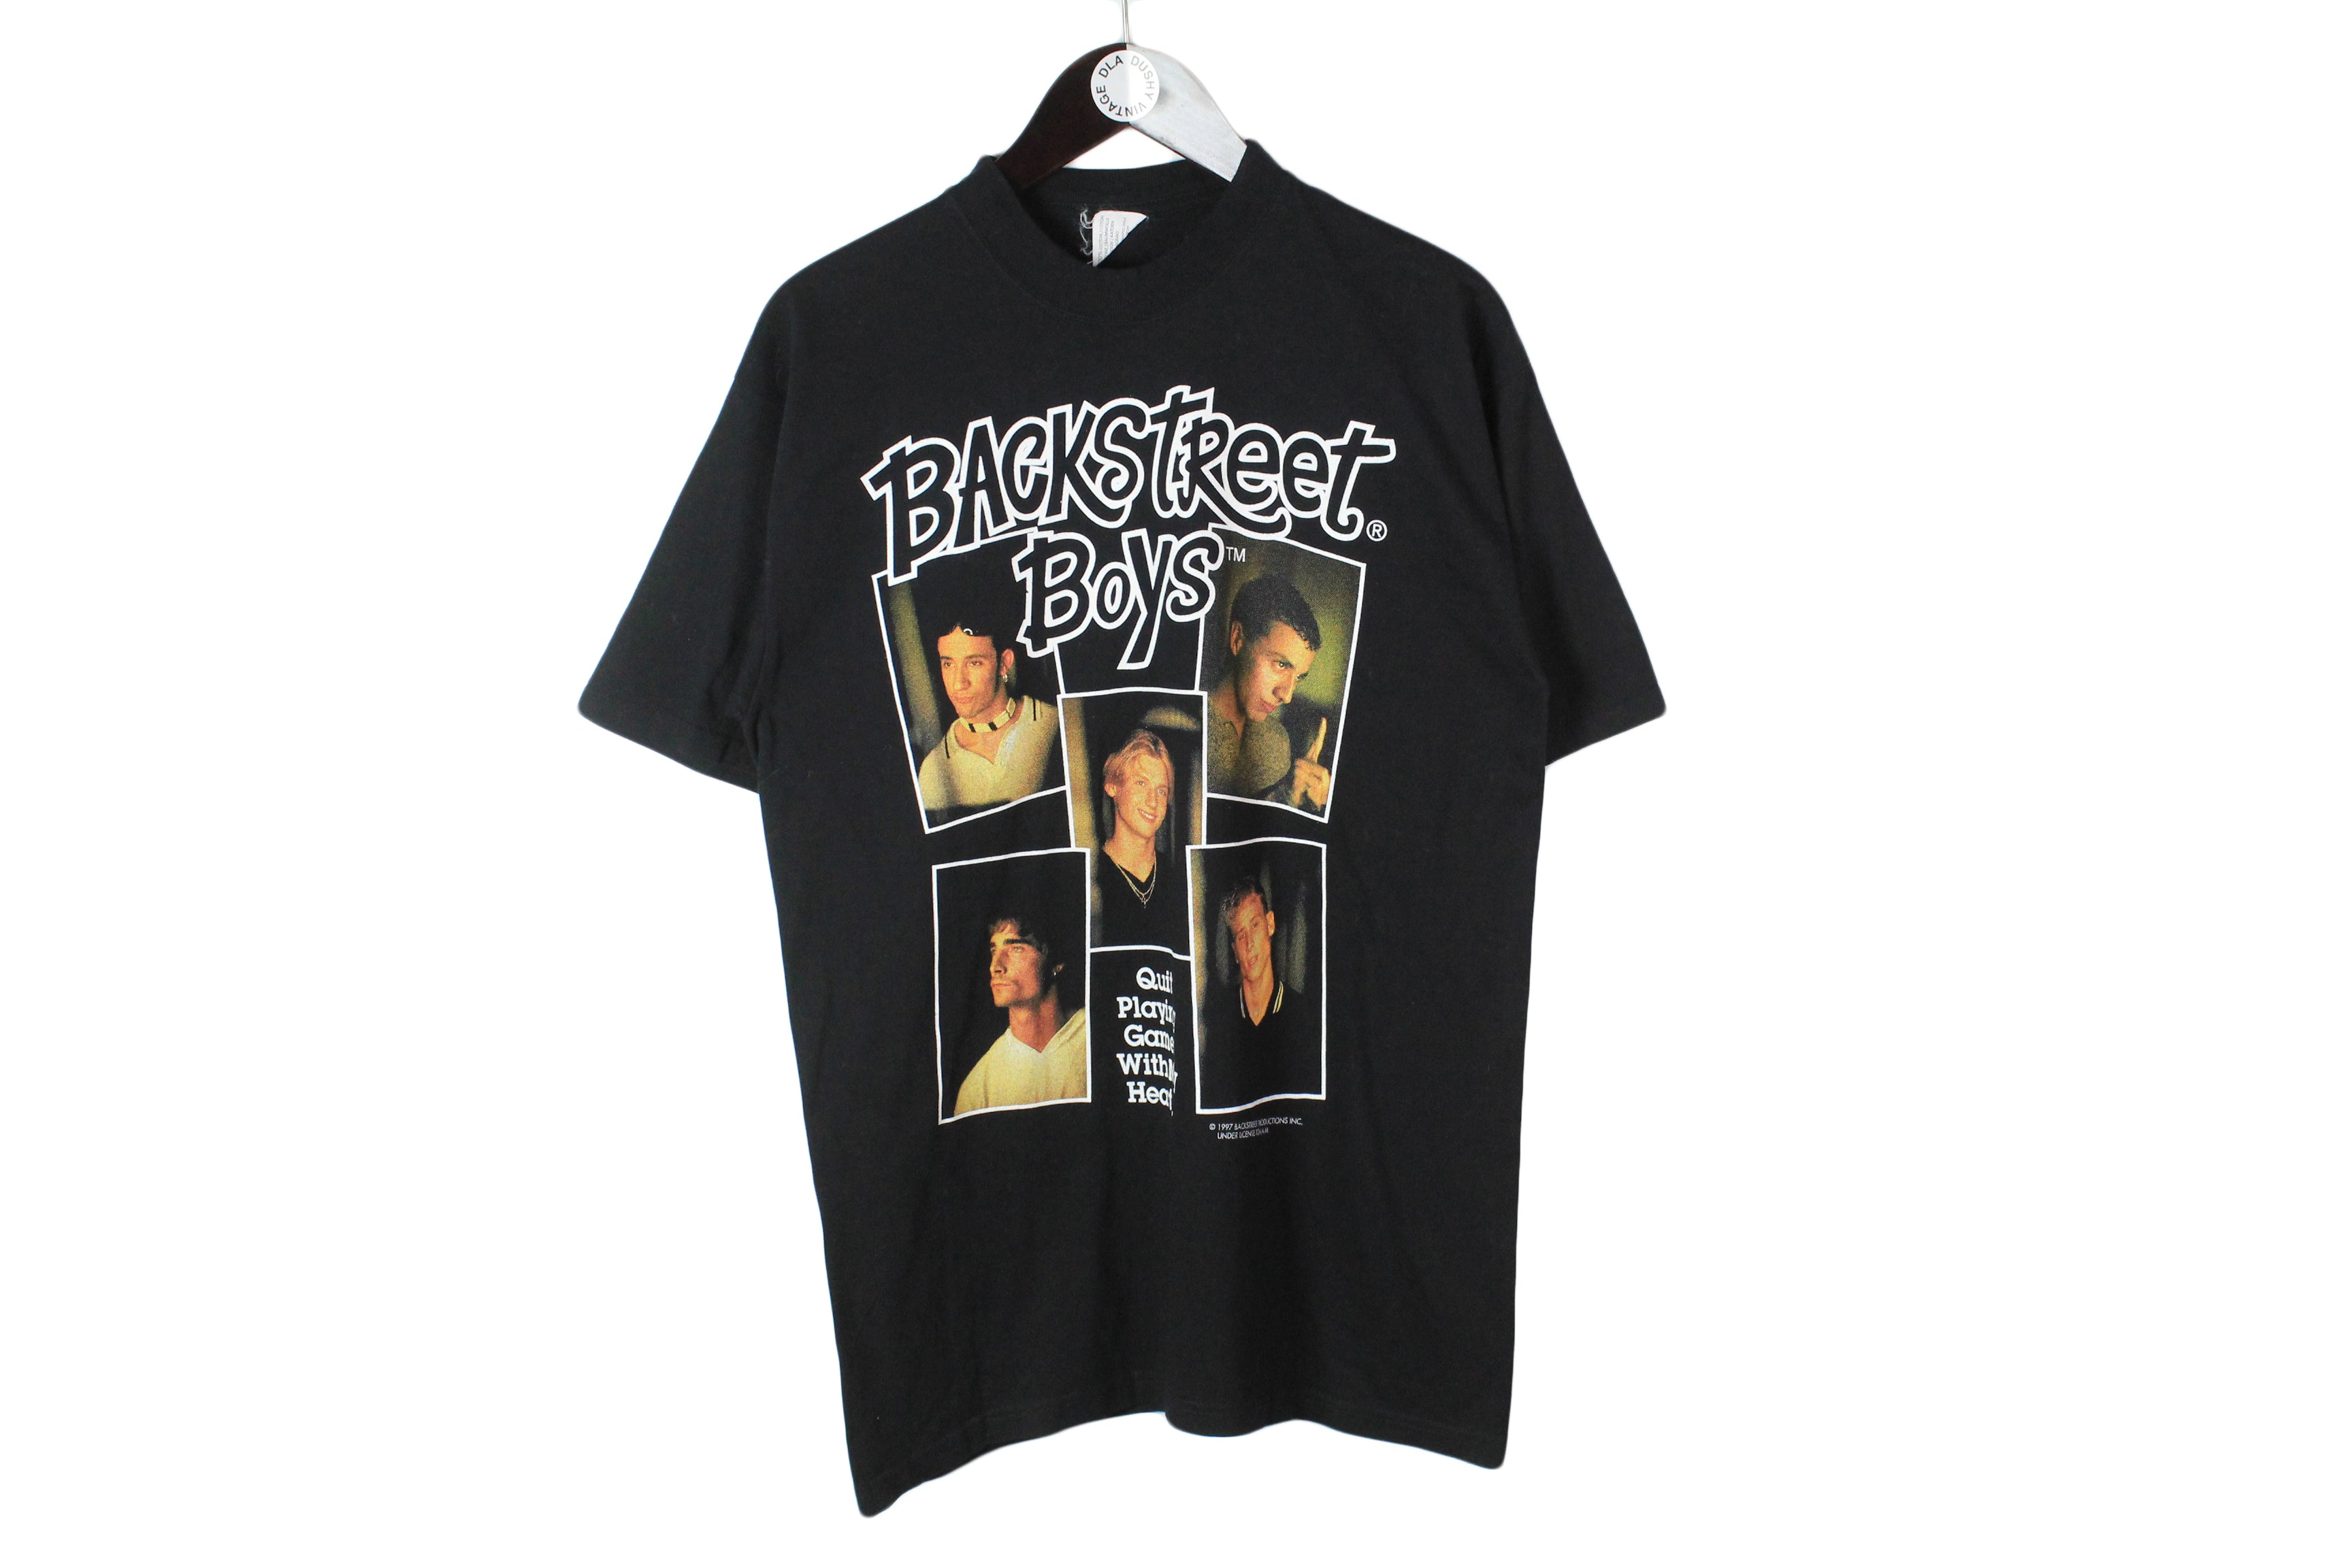 Quit Playing Games With My Heart Backstreet Boys Shirt 